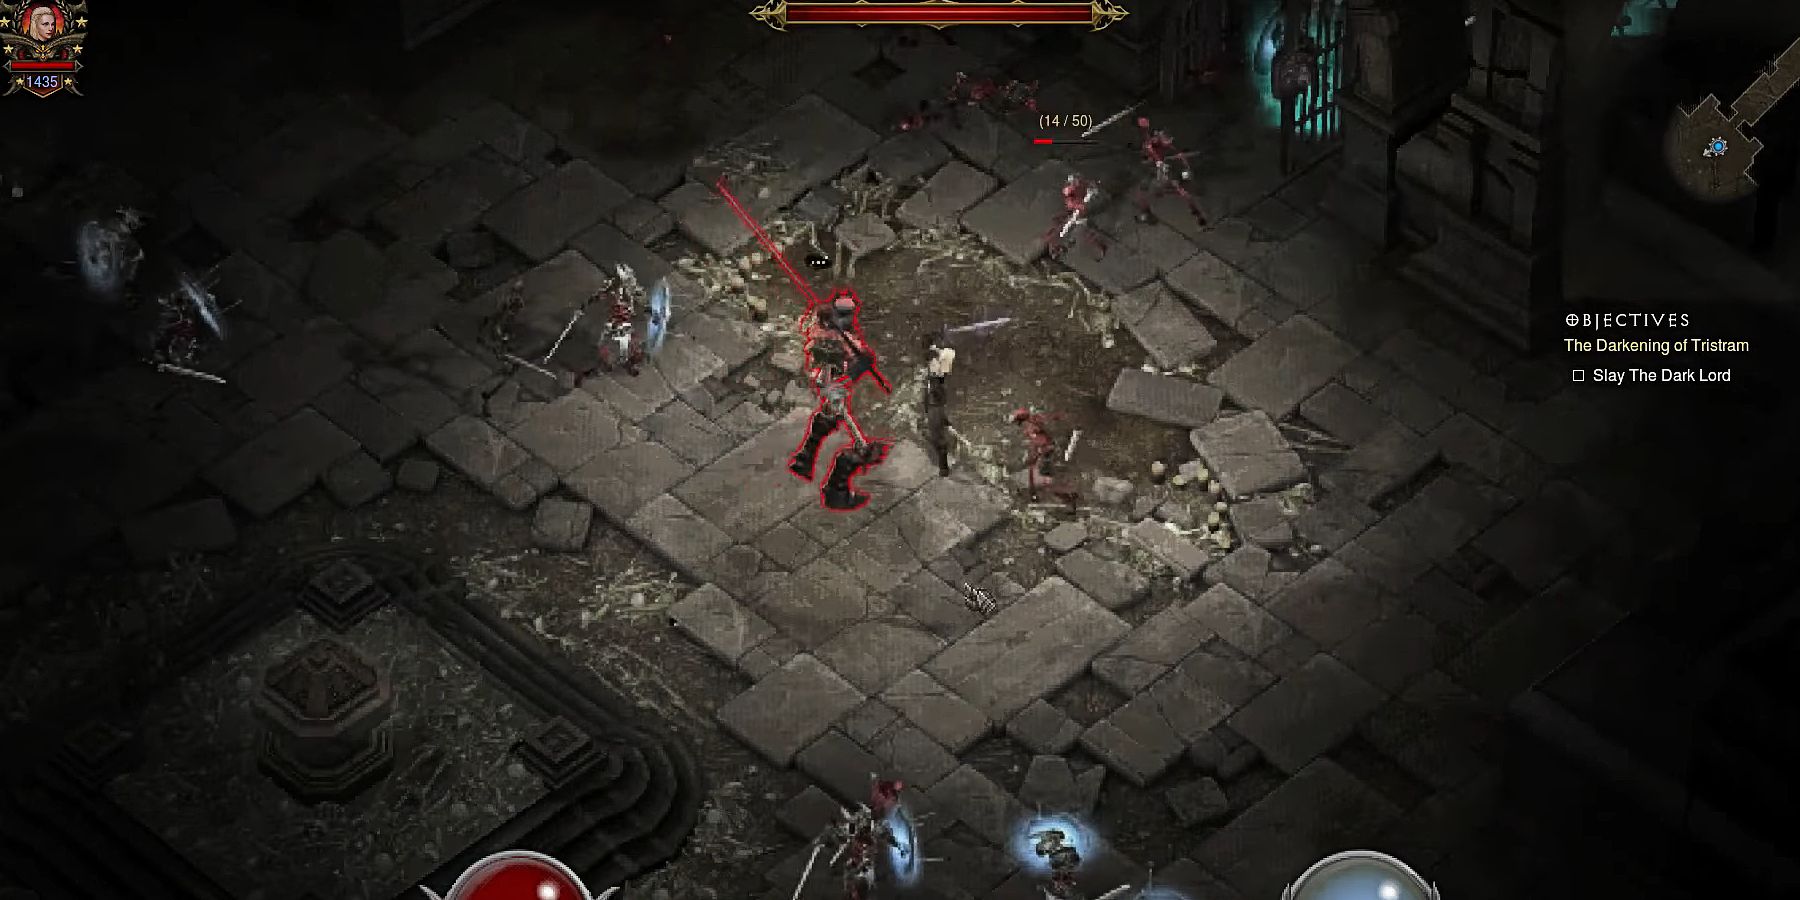 The player character surrounded by enemies in a dungeon in Diablo 3.